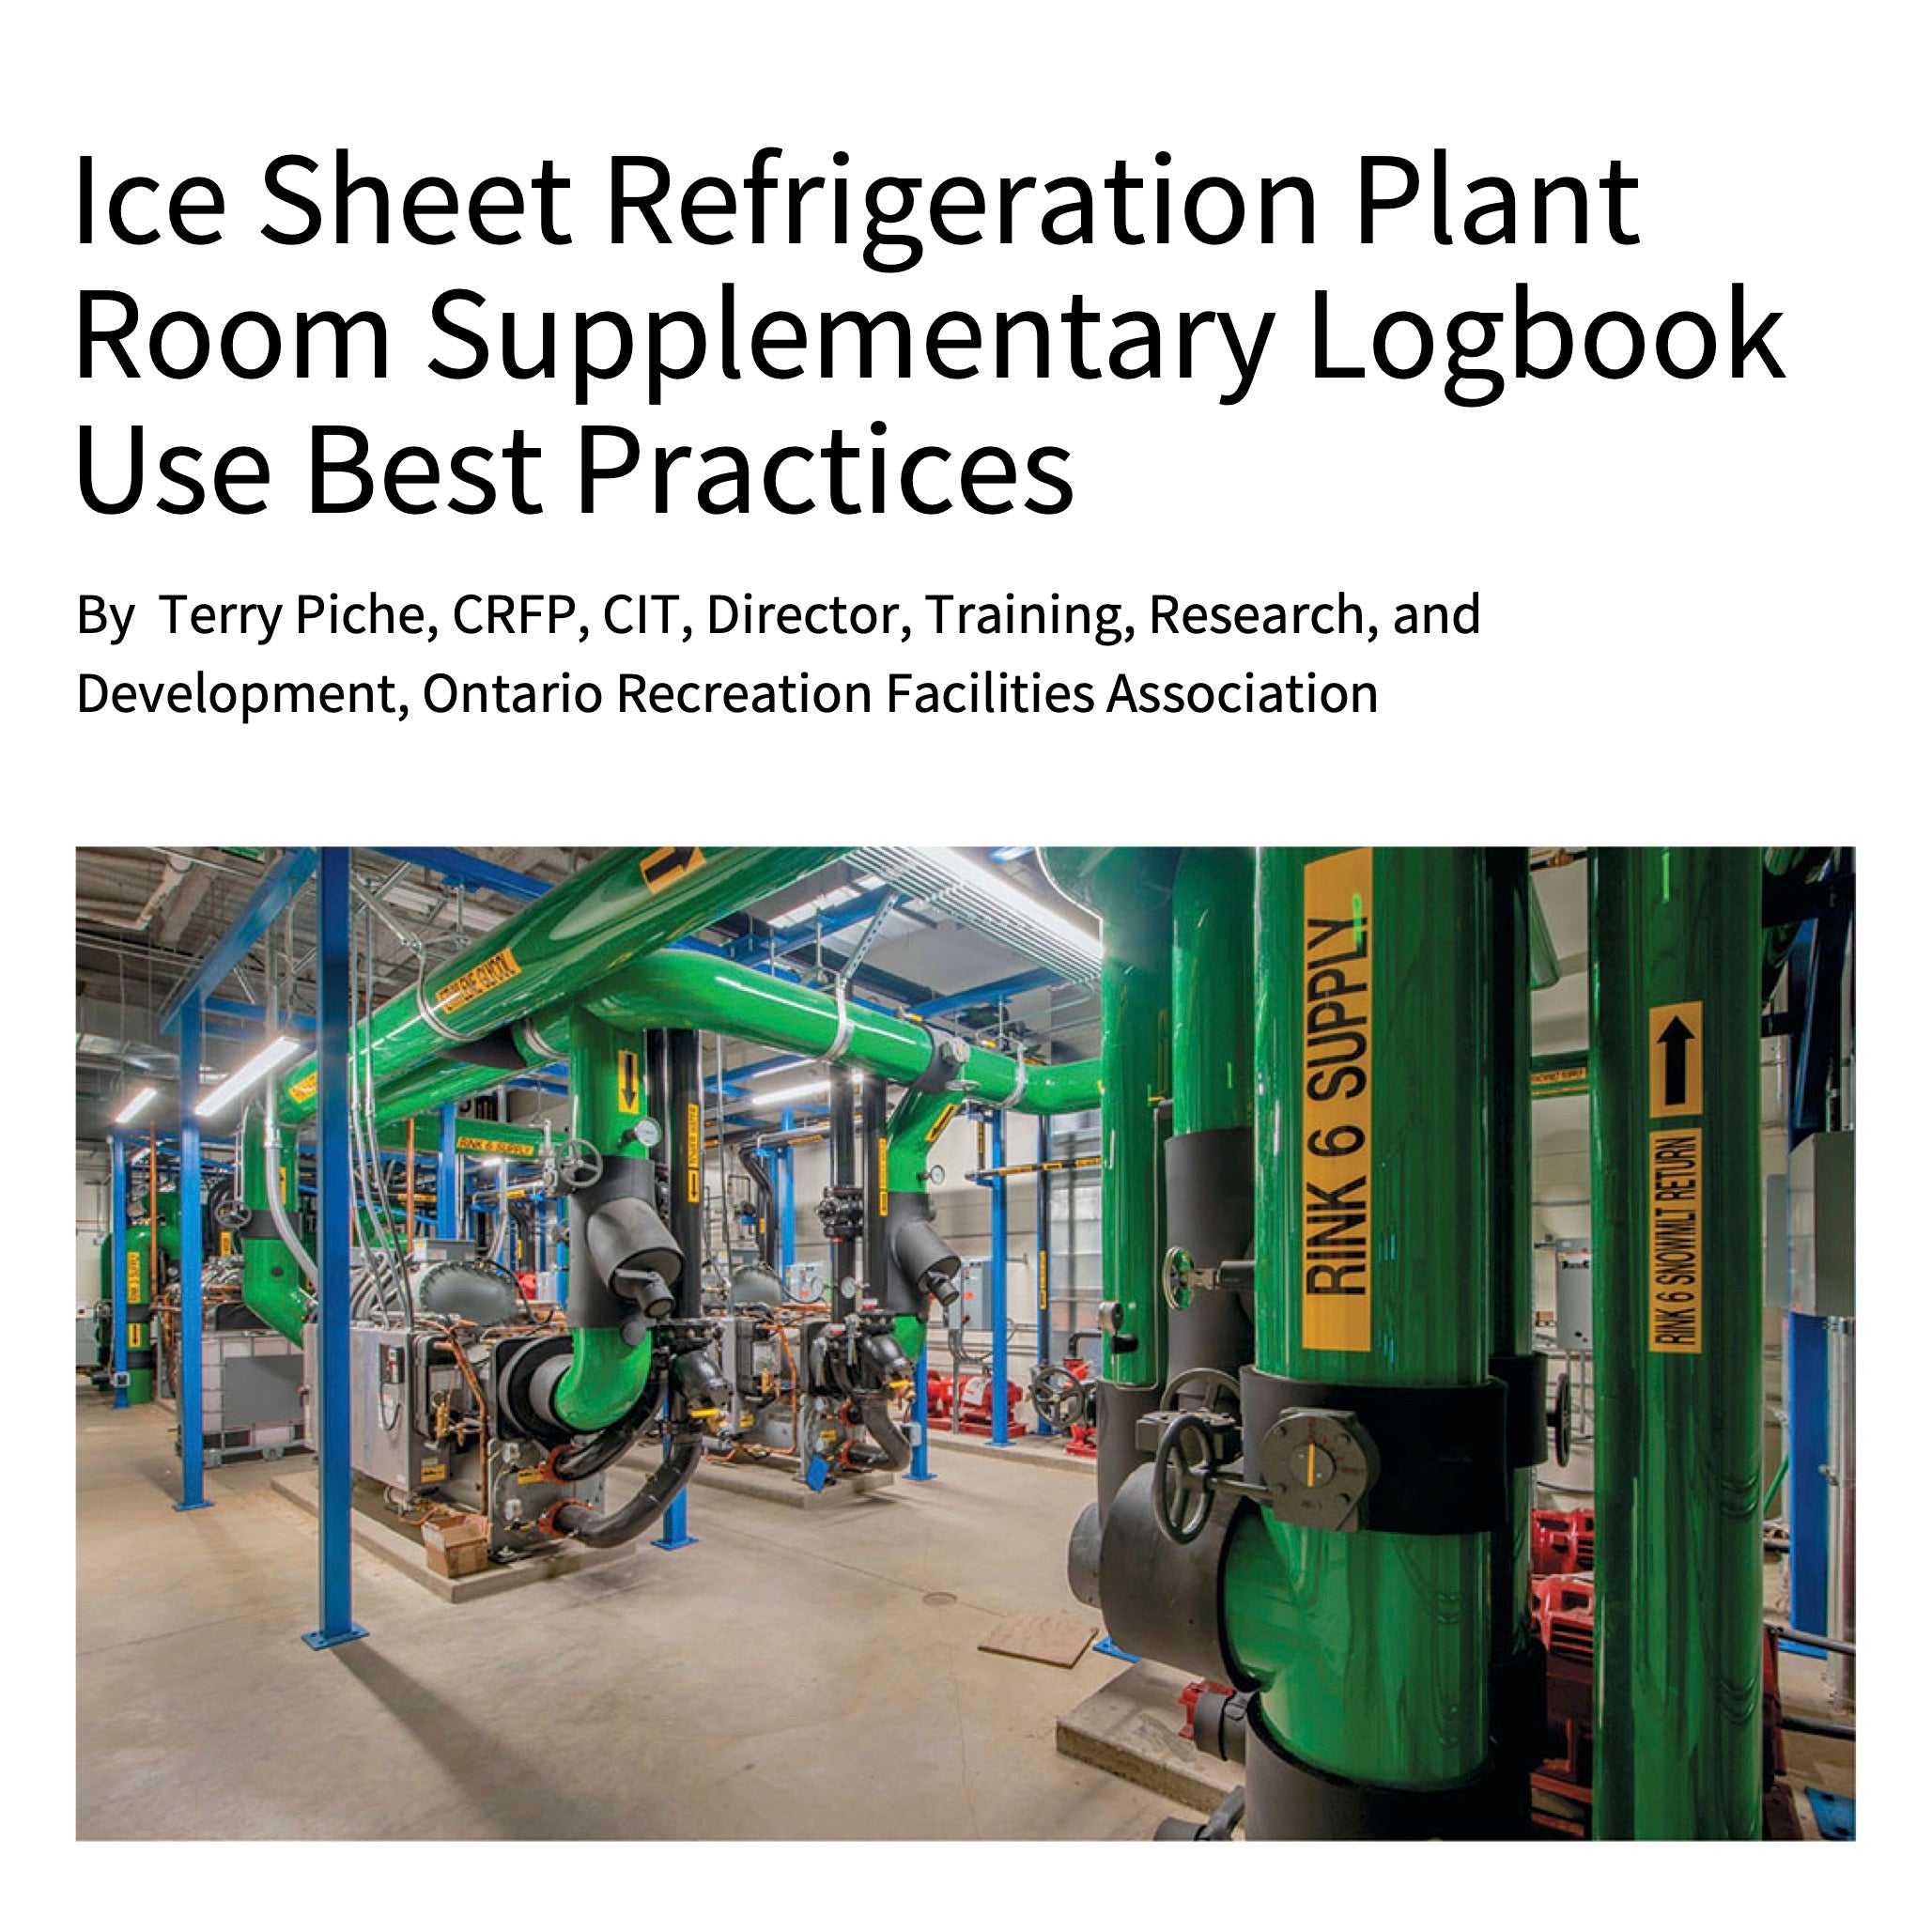 Ice Sheet Refrigeration Plant Room Supplementary Logbook Use Best Practices